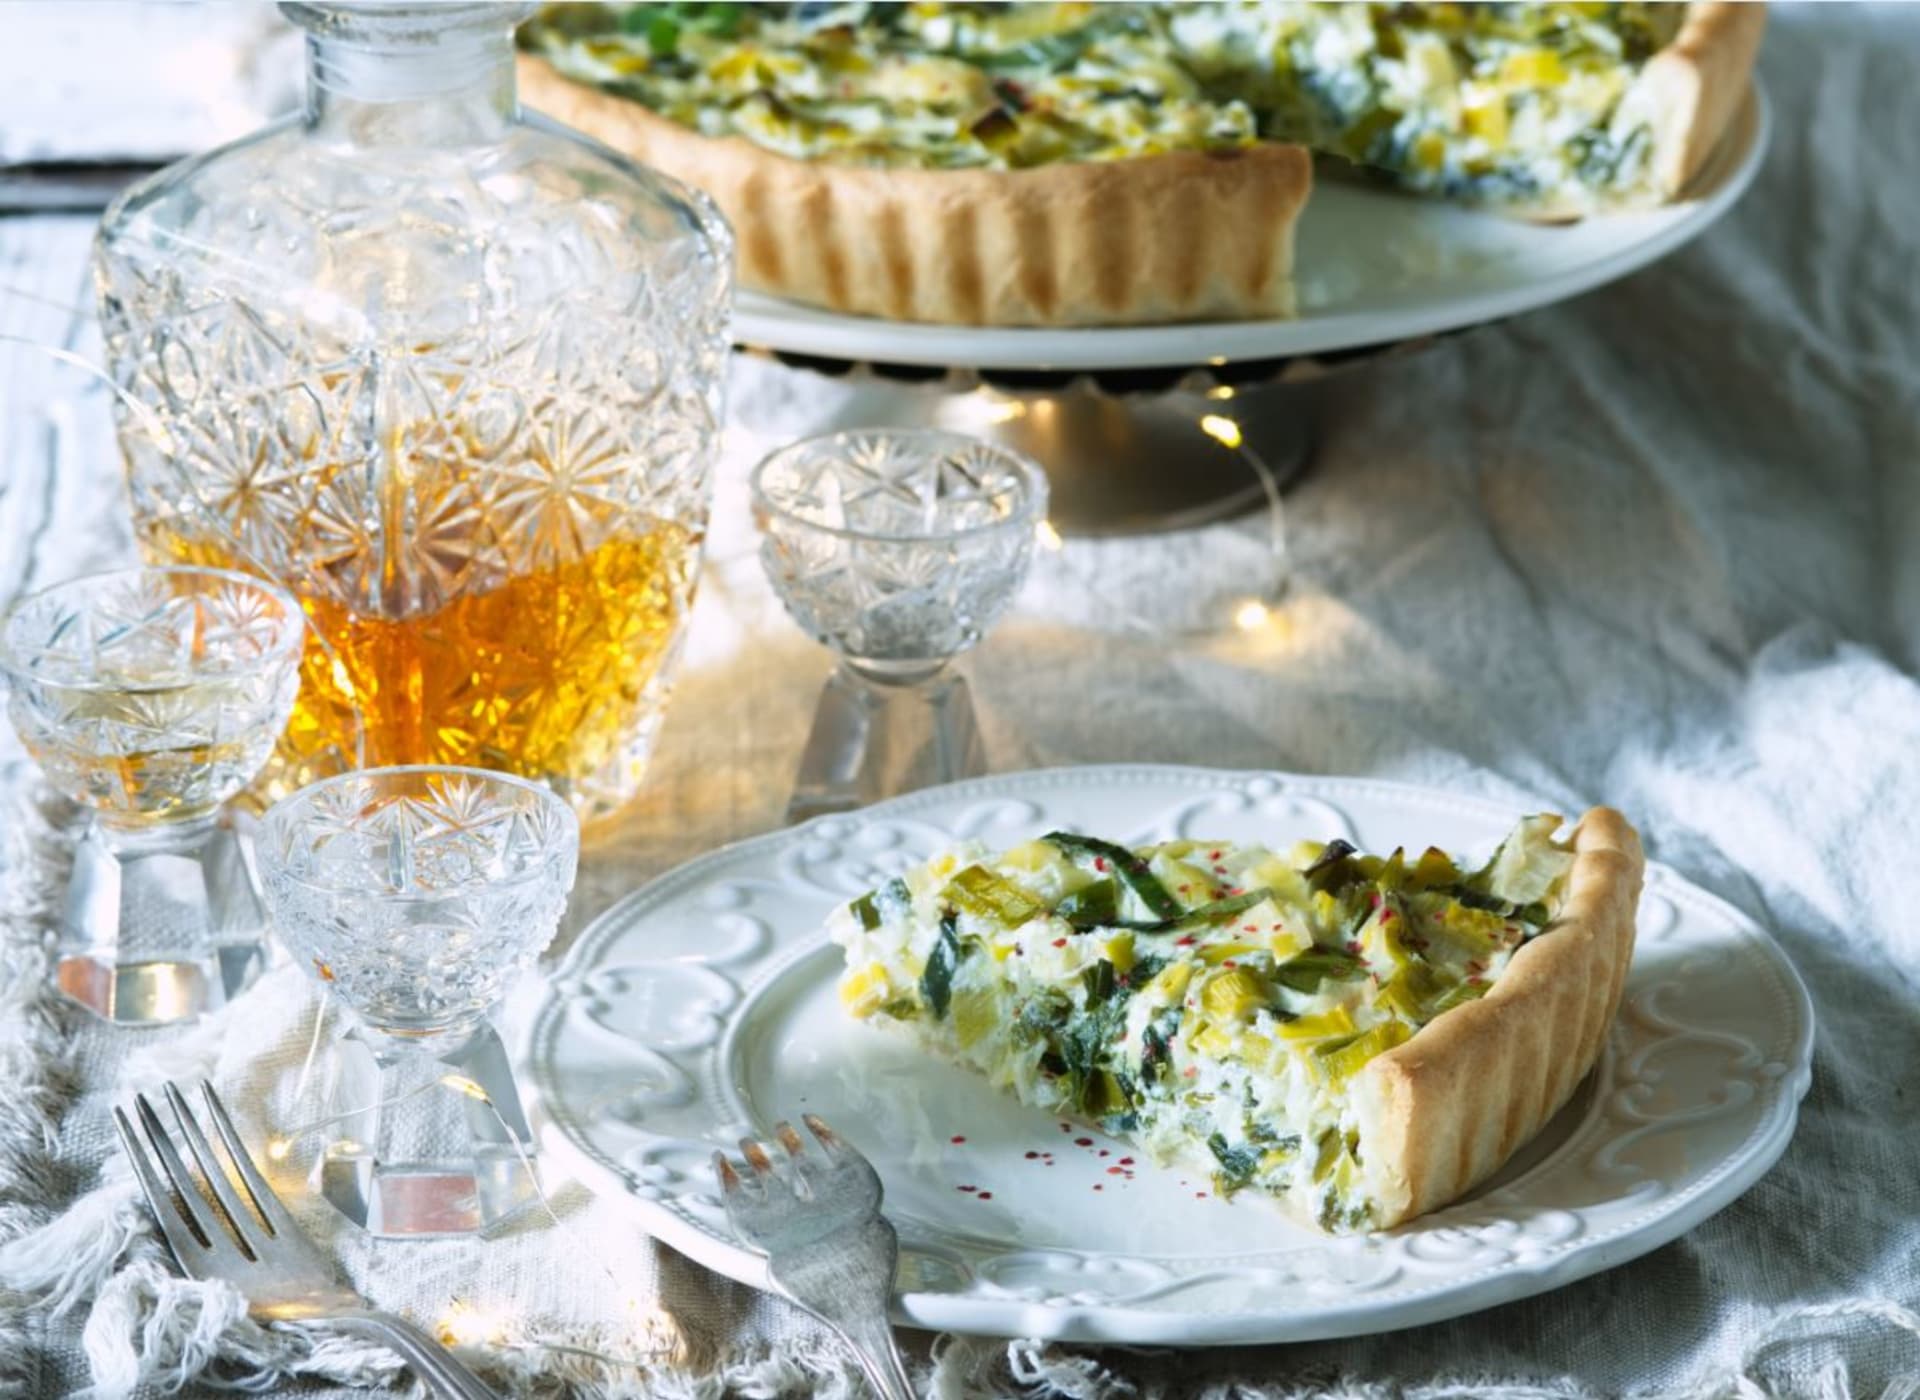 Treasures of French cuisine: leek pie made with shortcrust pastry